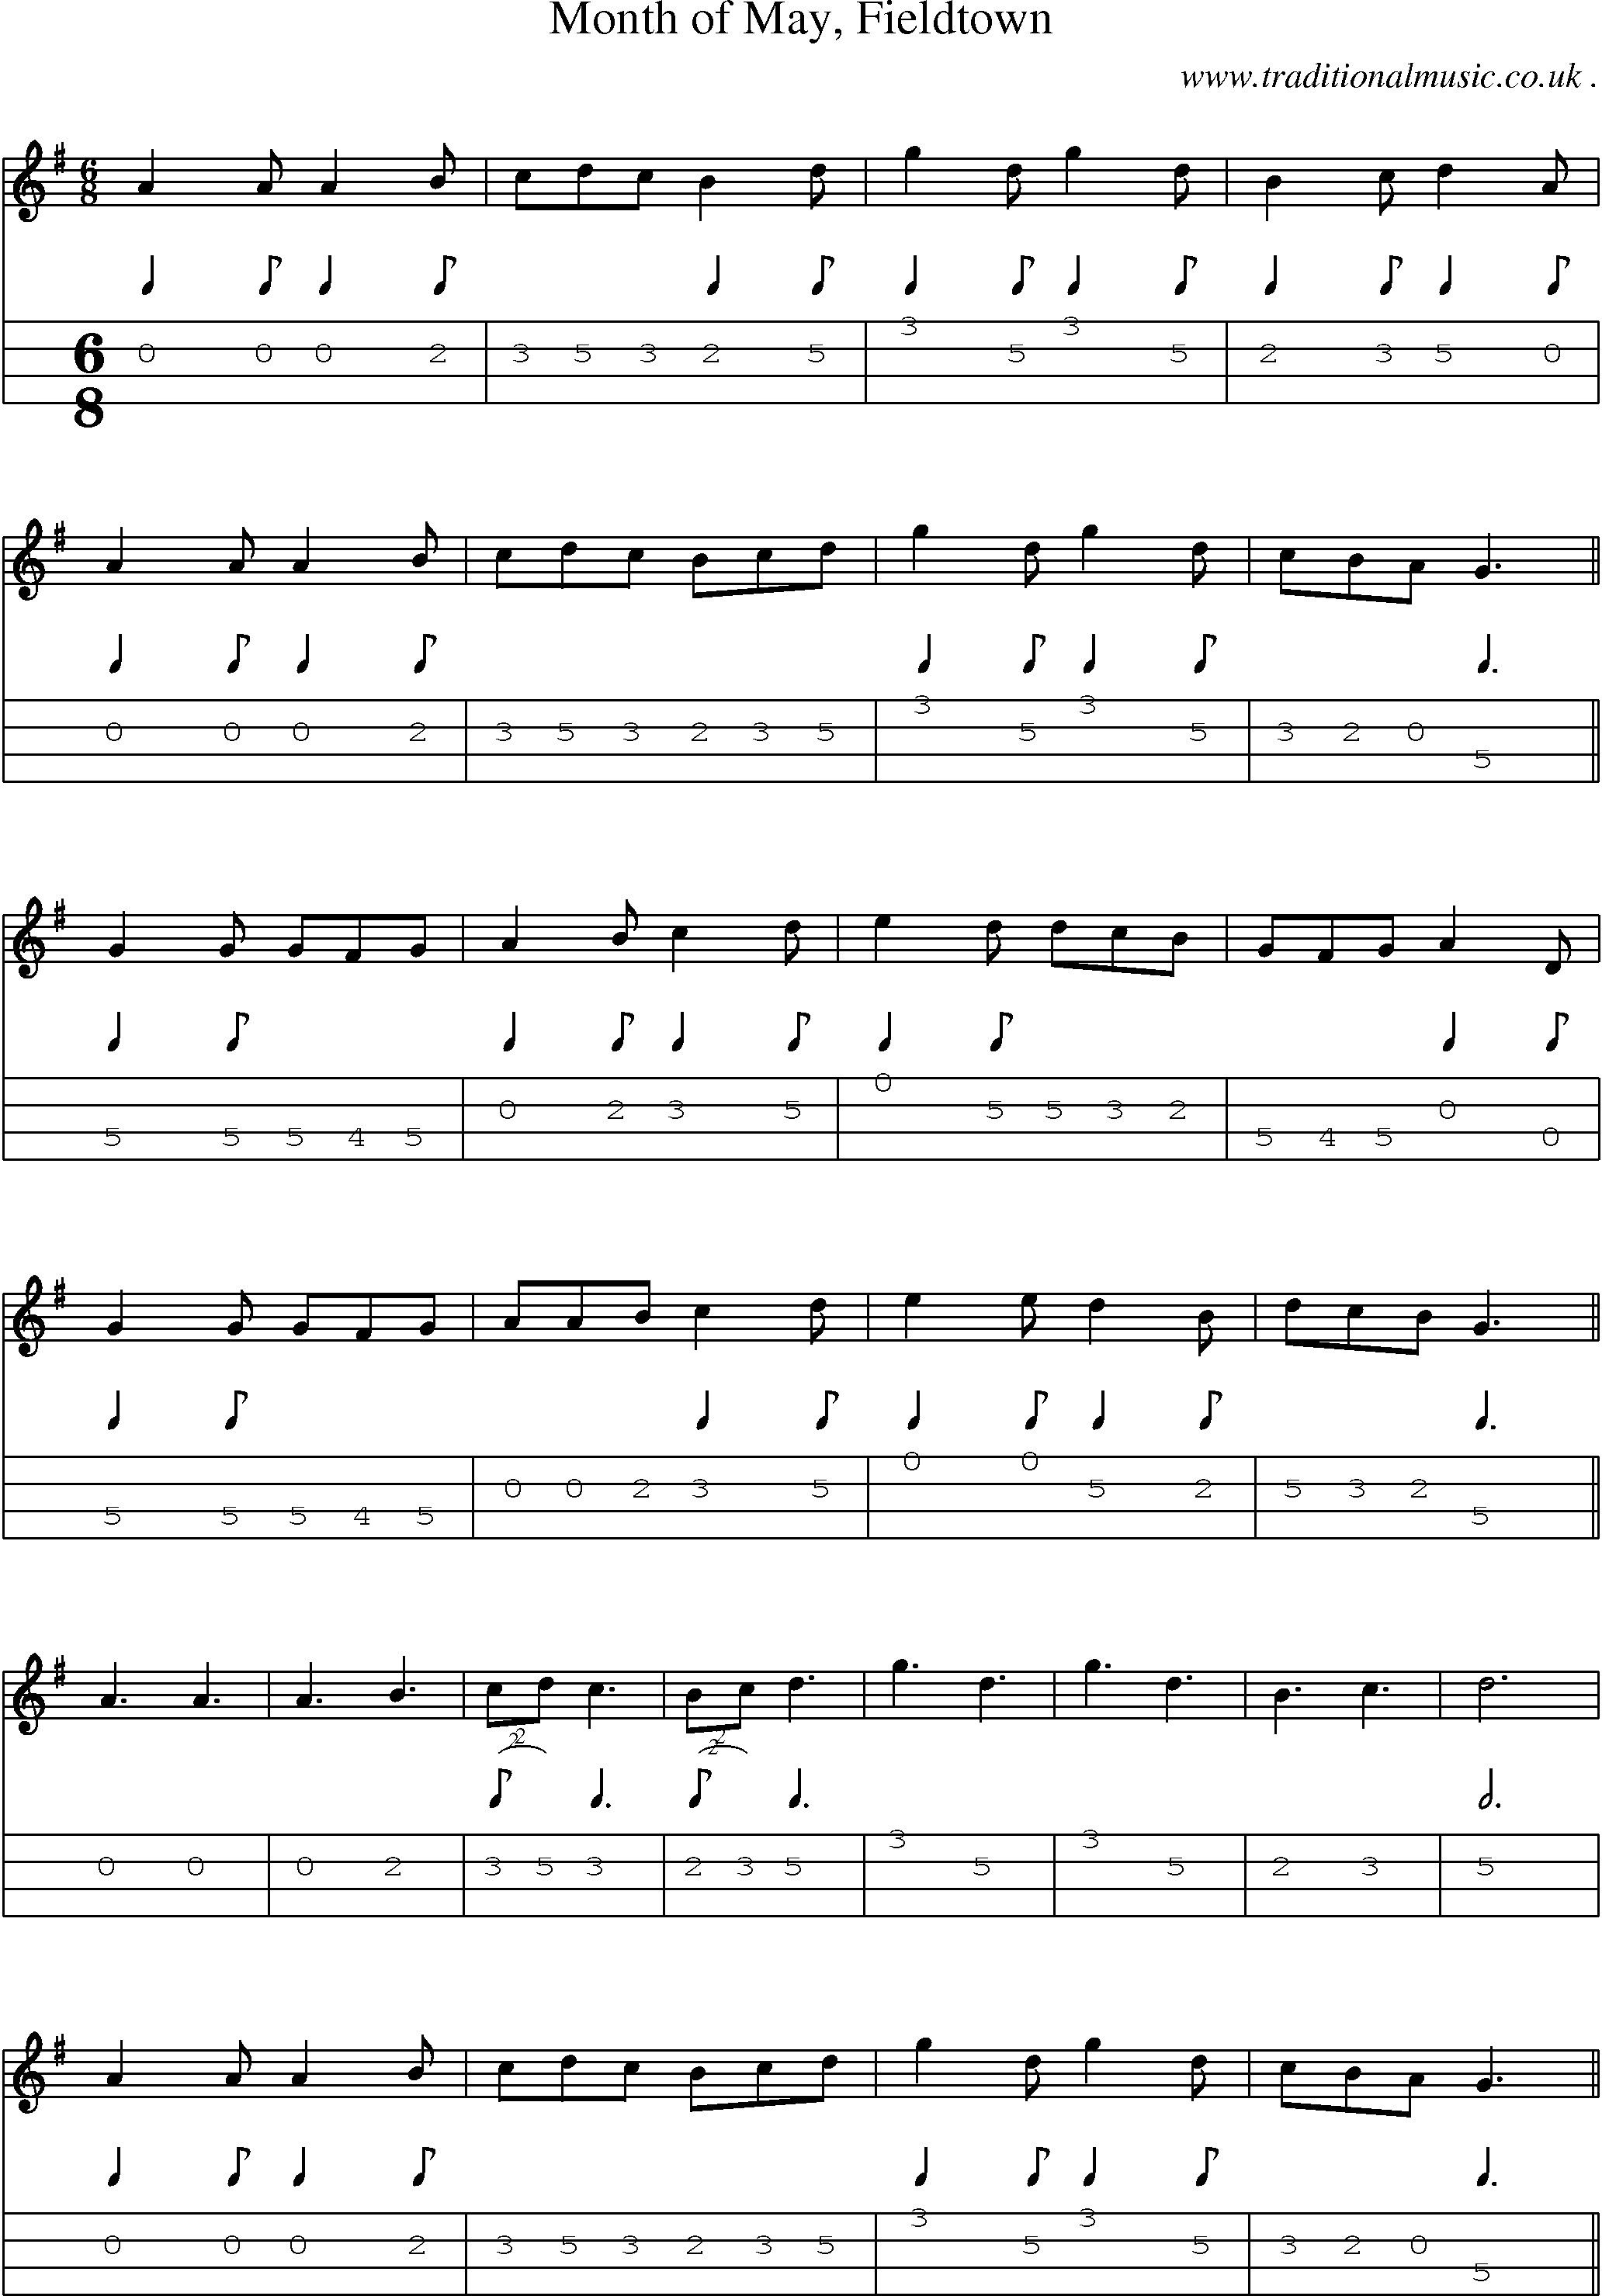 Sheet-Music and Mandolin Tabs for Month Of May Fieldtown